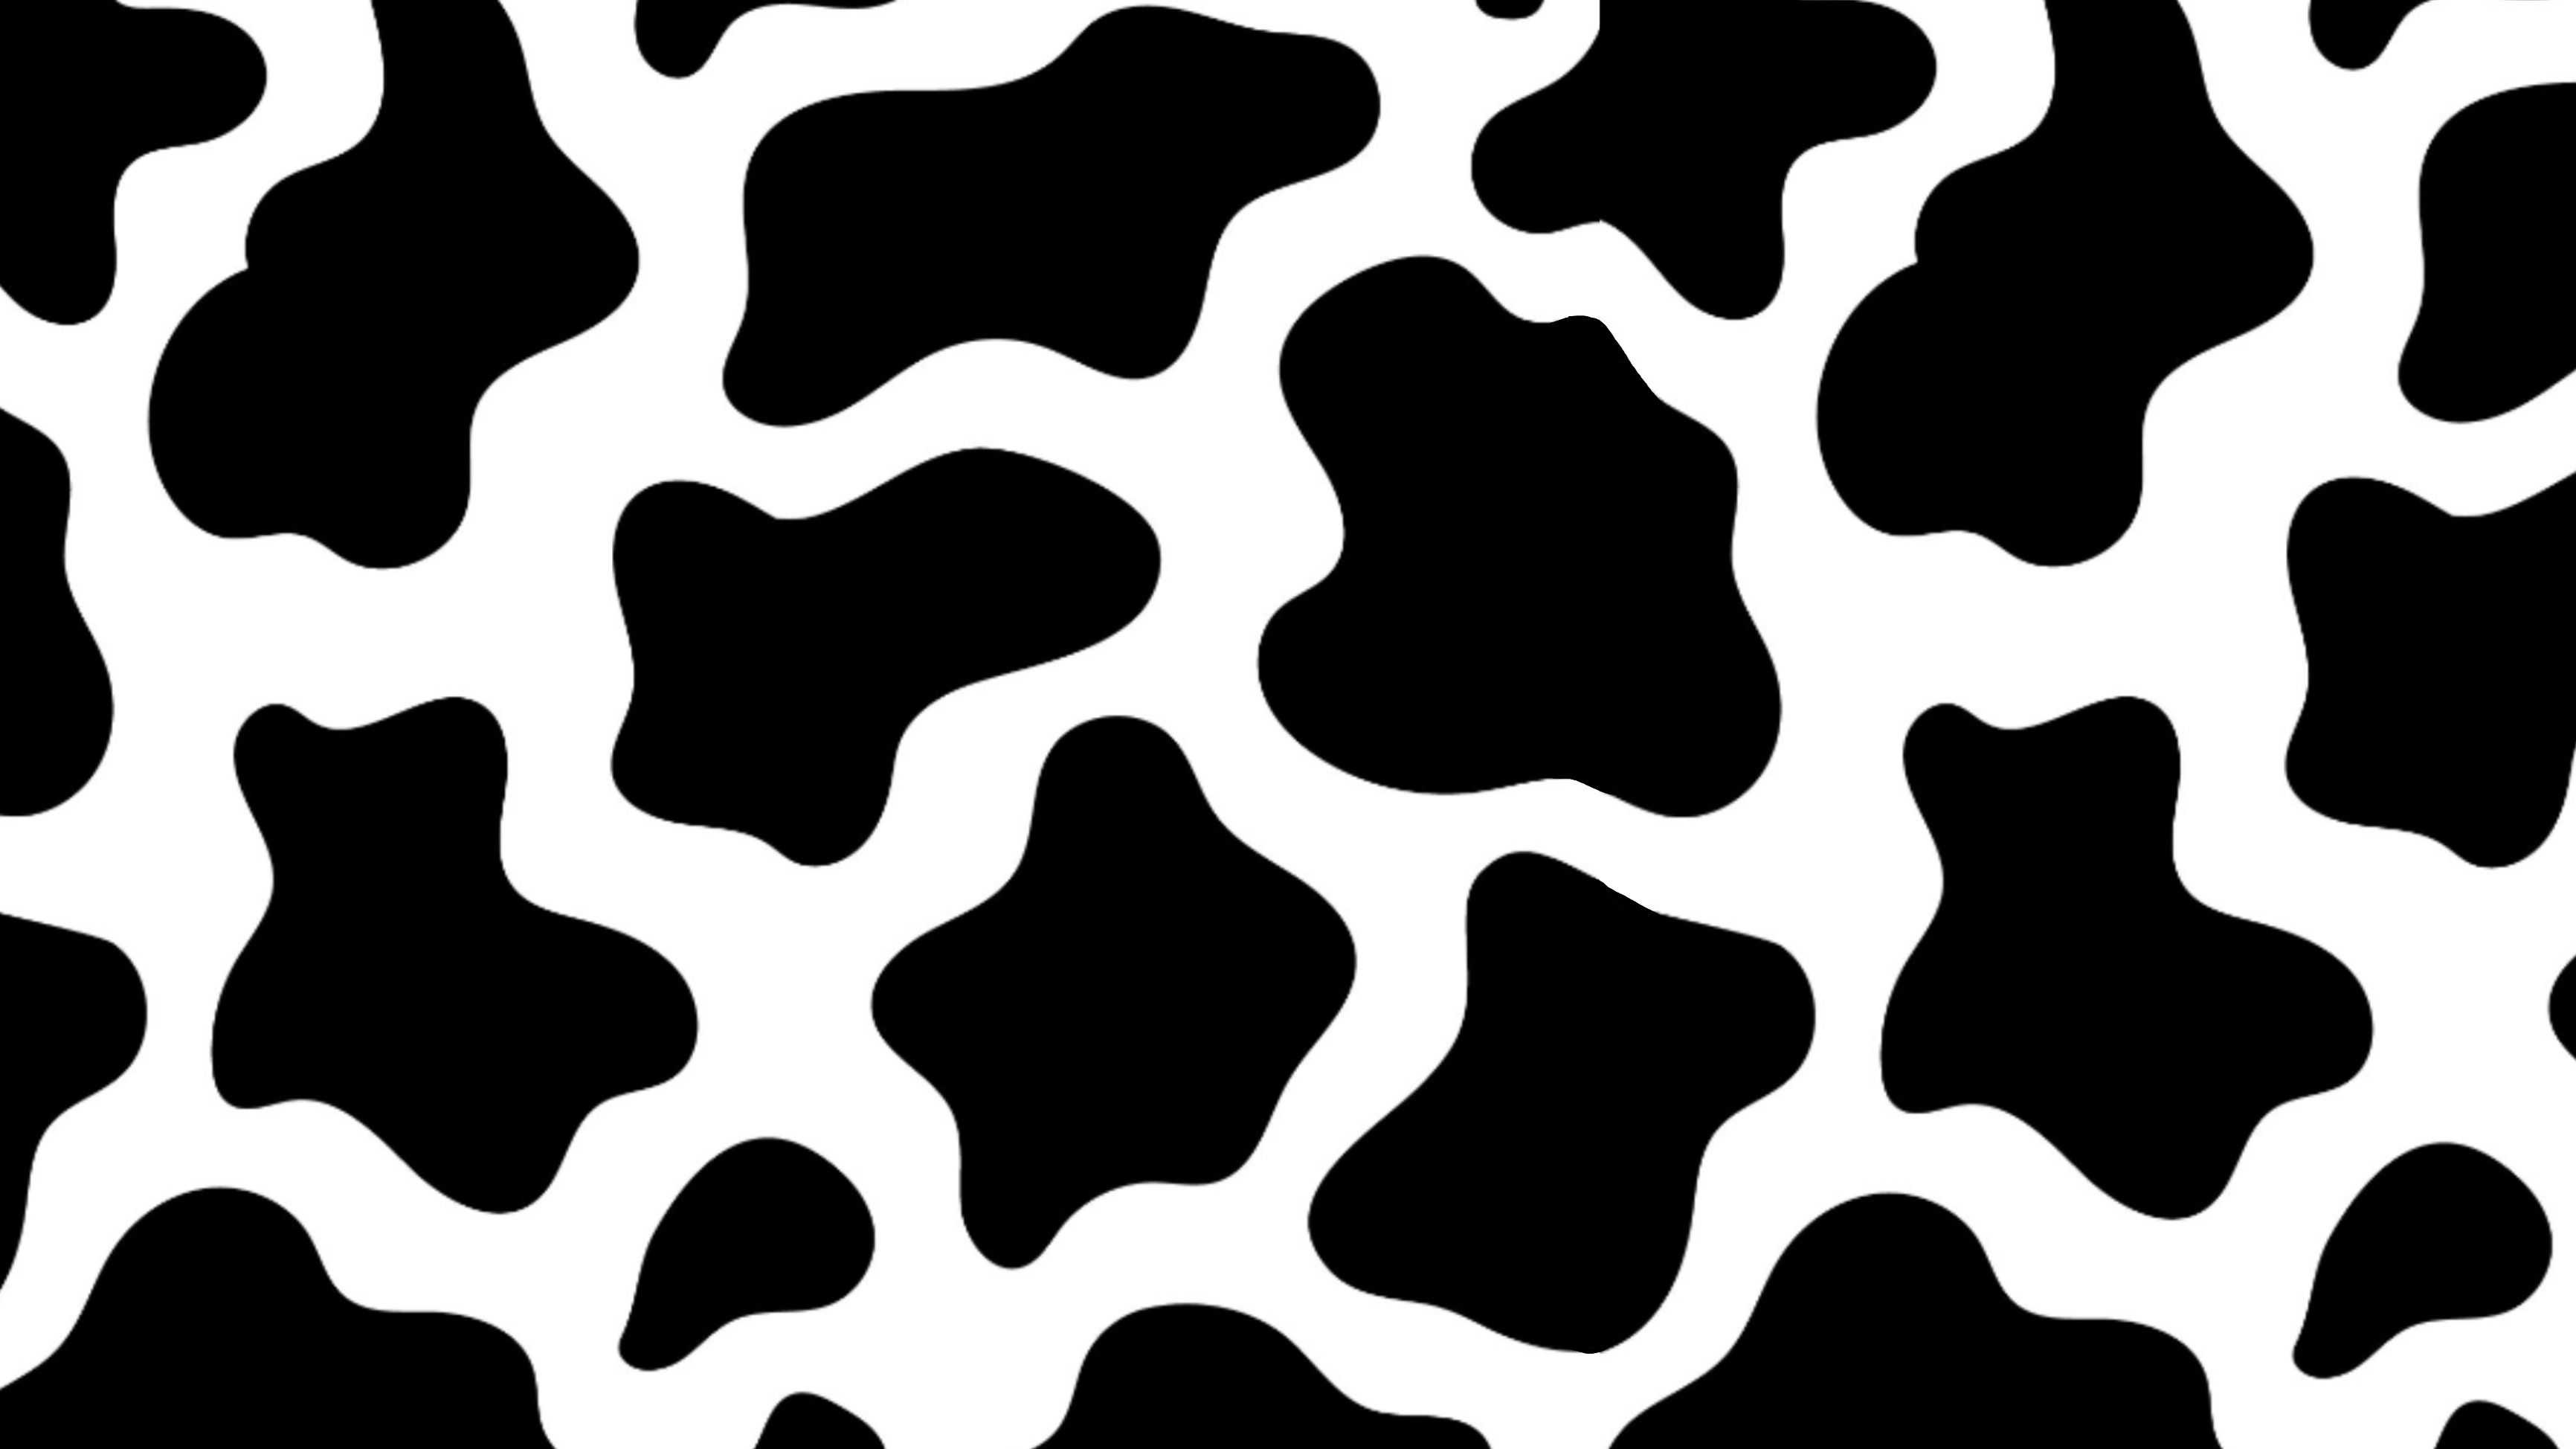 blue cow print for wallpaperbackground  Cow wallpaper Cow print wallpaper  Cute desktop wallpaper